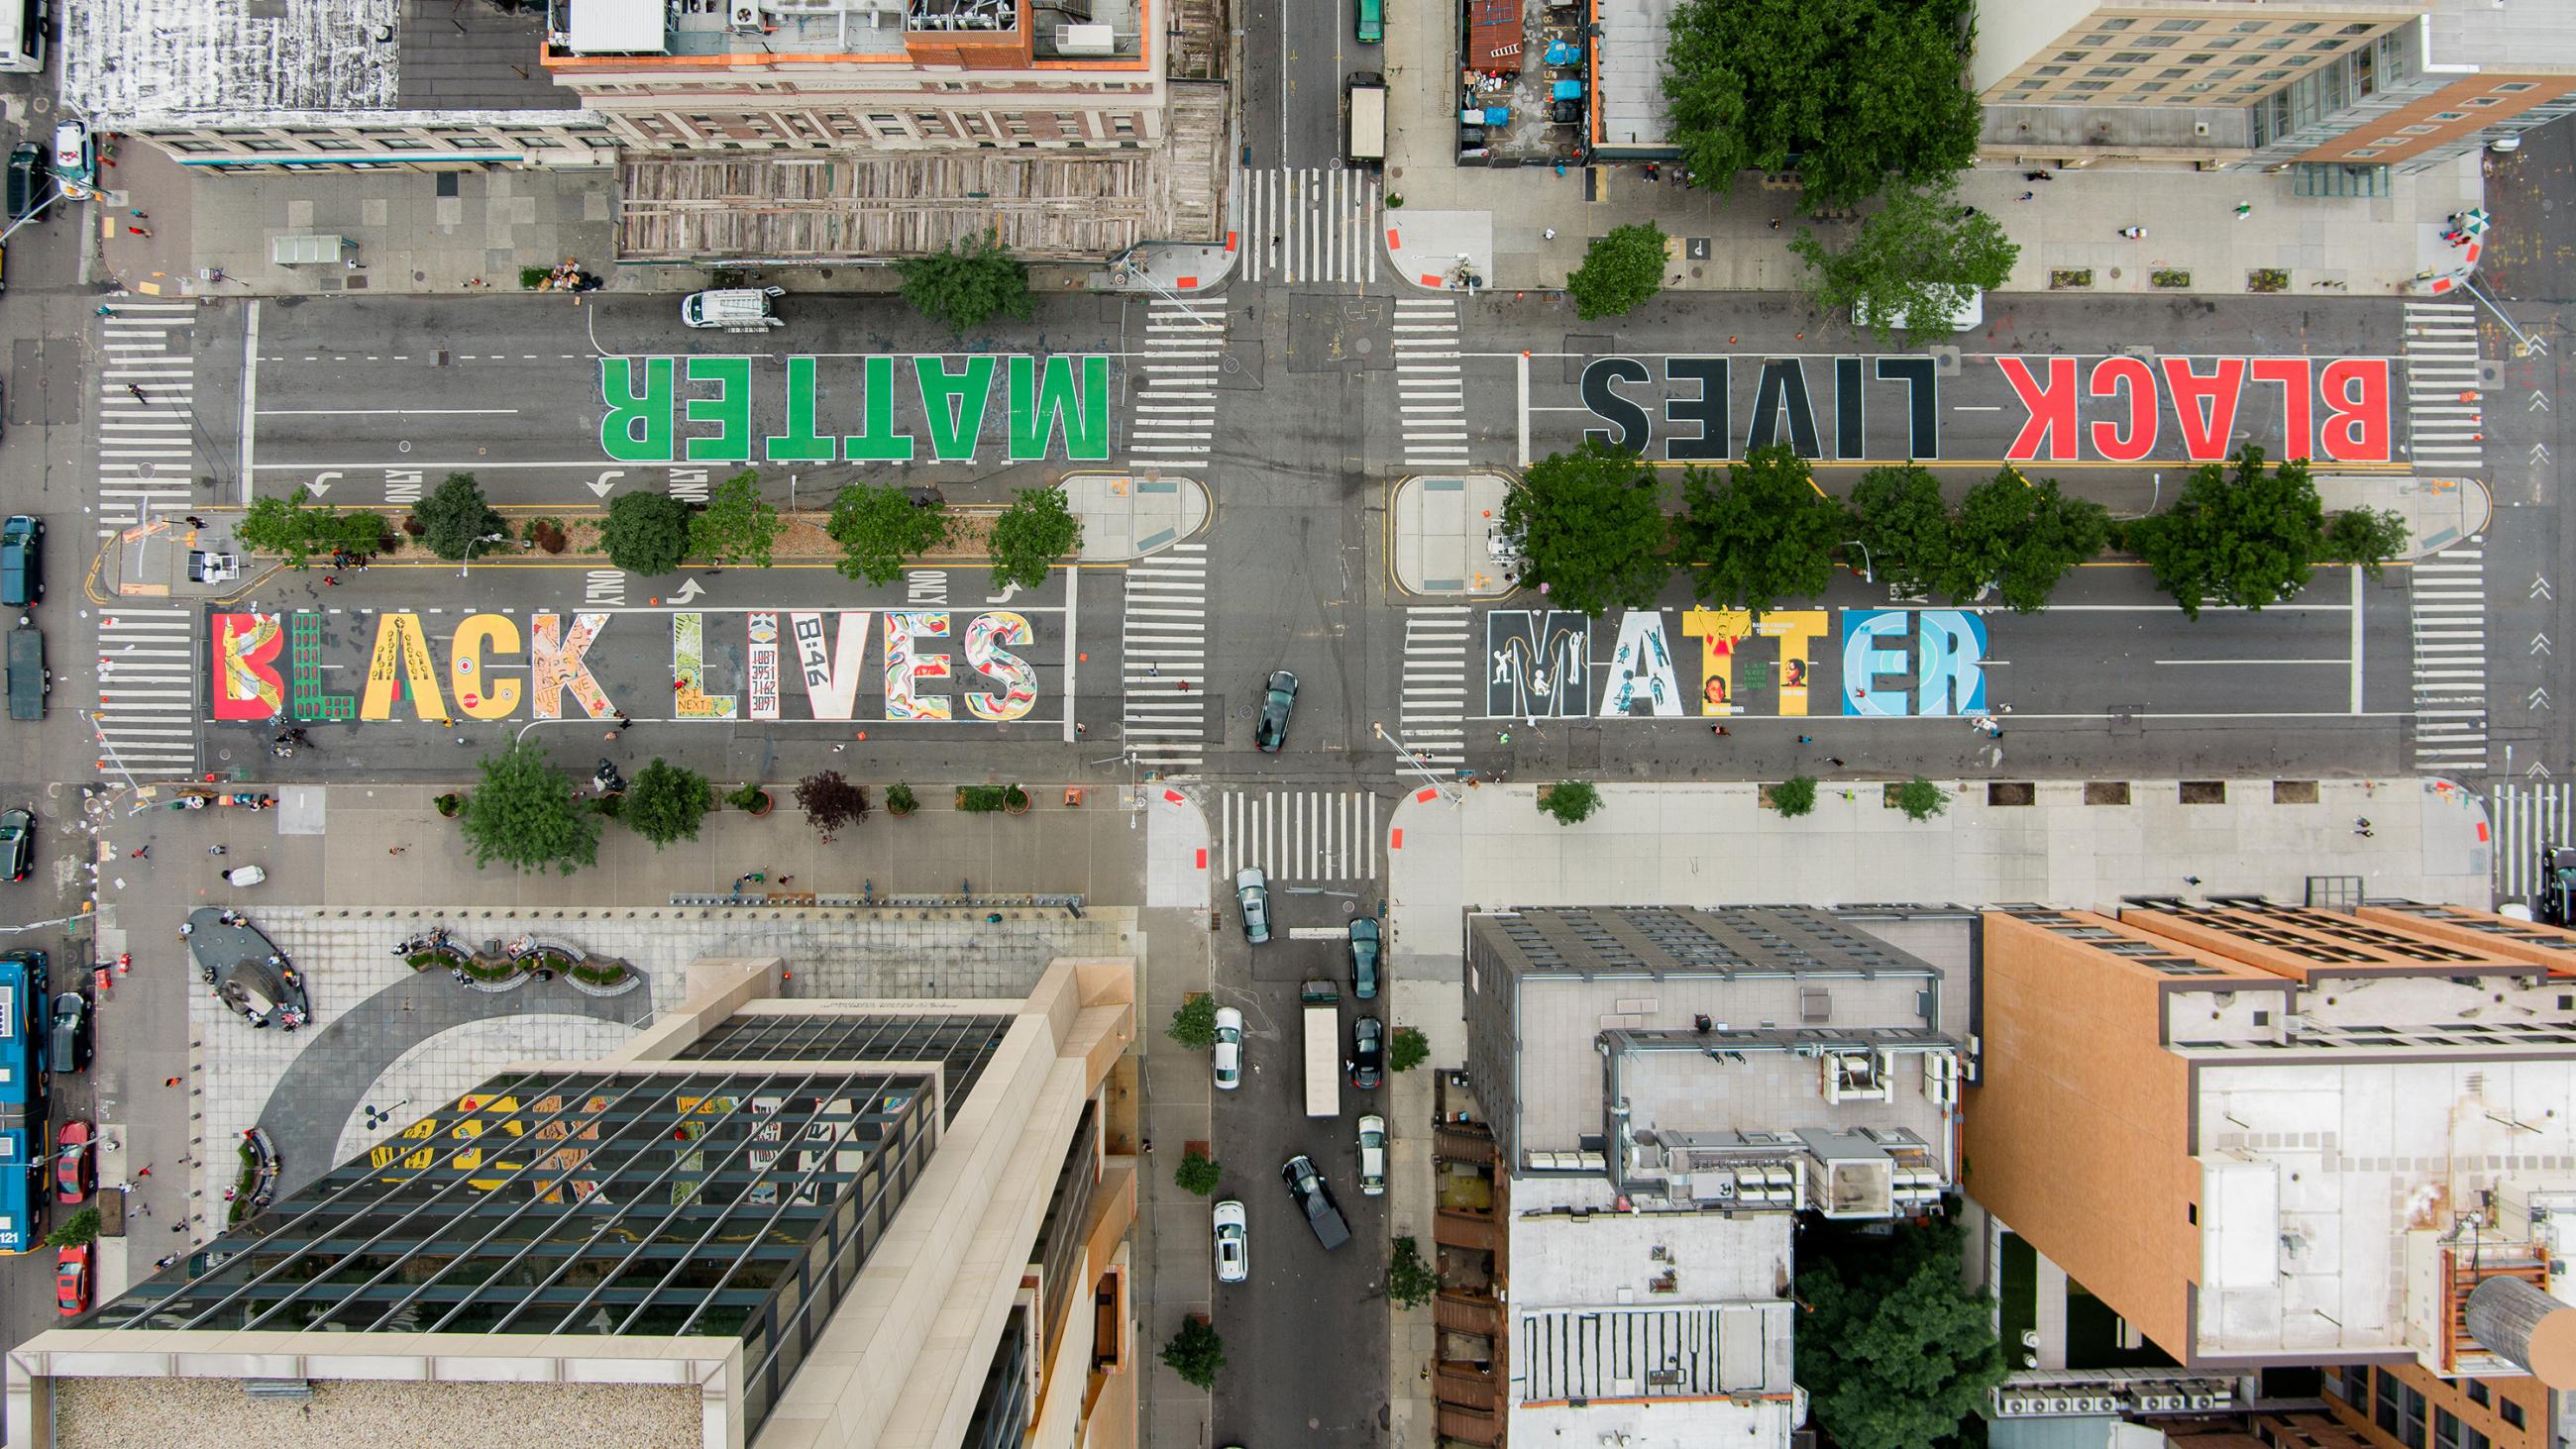 Picture from a drone flown above the street showing the colorful mural painted on the pavement. 